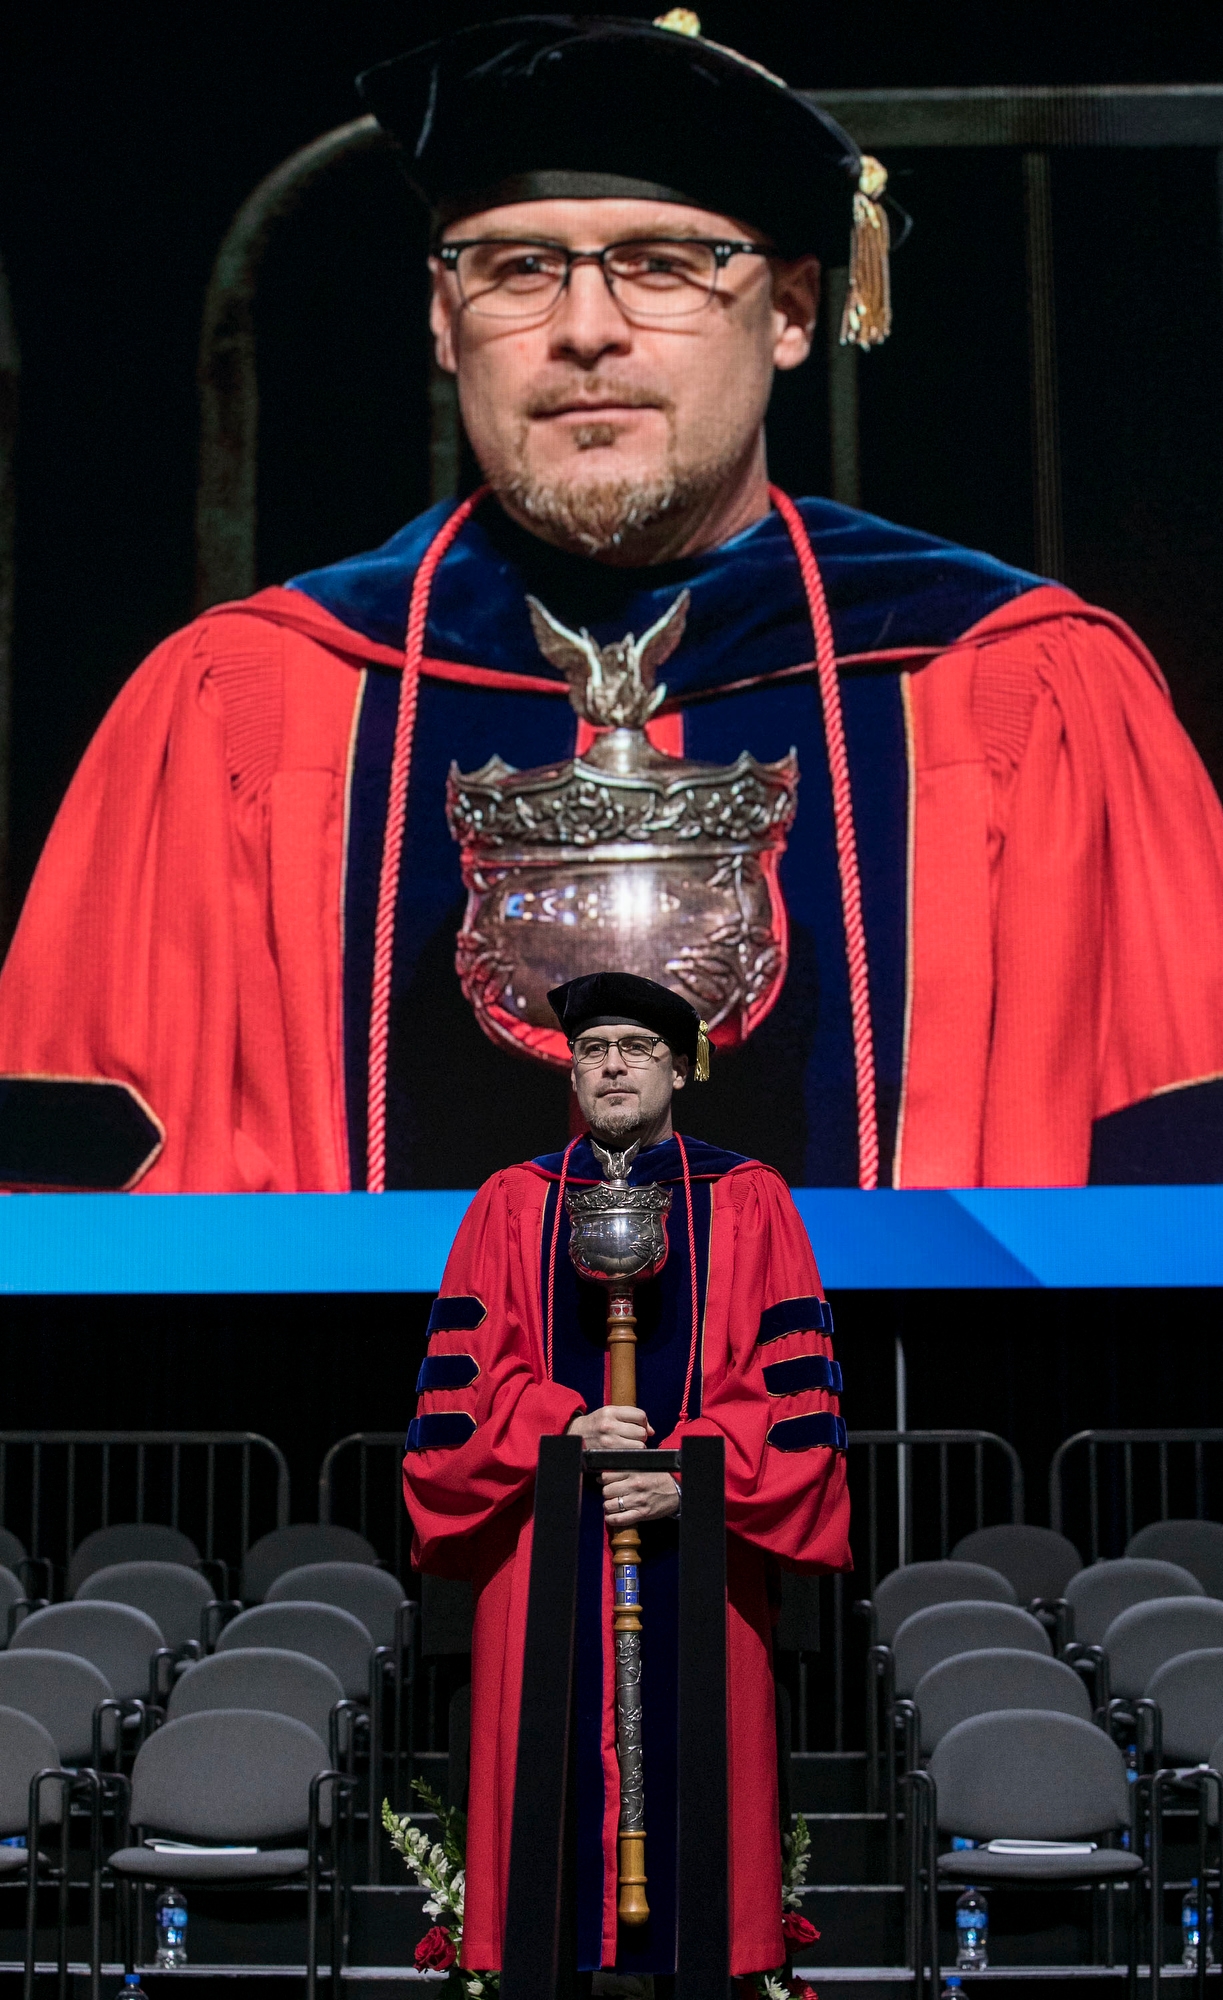 Patrick J. Murphy, professor, stands on stage with the university mace to begin the commencement ceremony for the Driehaus College of Business. (DePaul University/Jamie Moncrief)